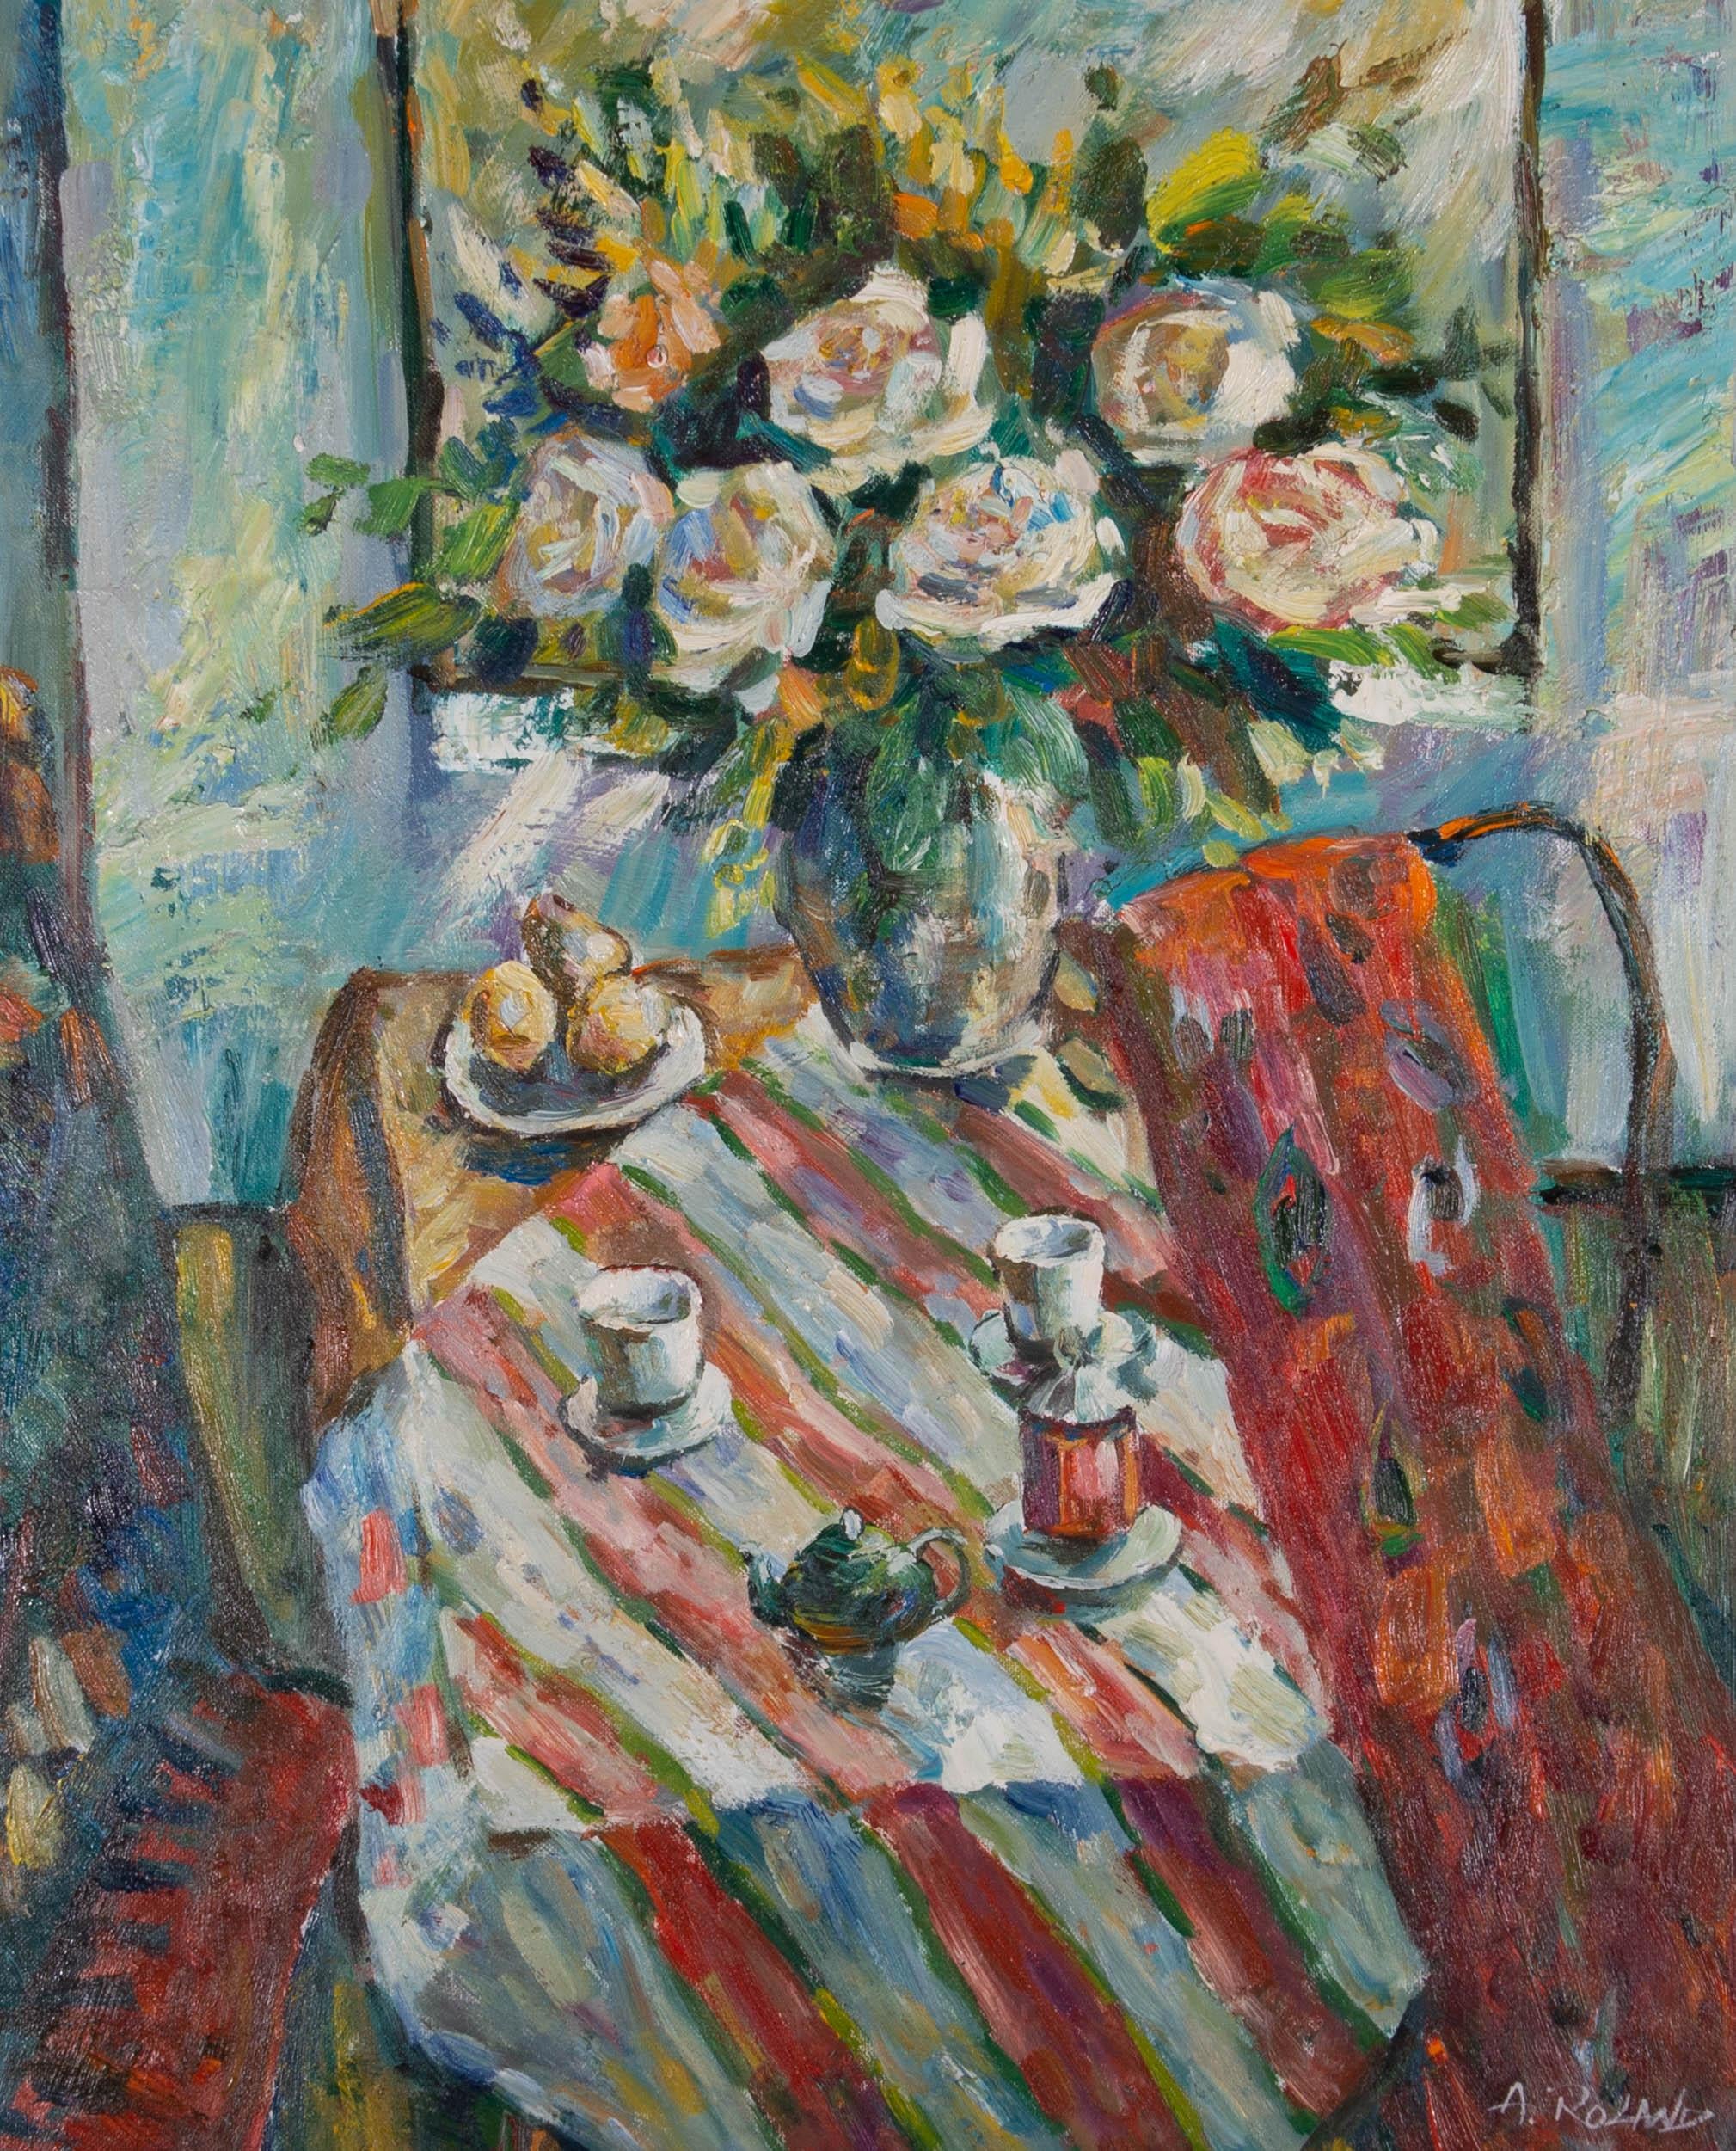 A superbly executed oil painting by A. Roland. The scene depicts an interior view with a table set for afternoon tea, beautifully decorated with a striking flower arrangement. Through the use of impasto and vibrant colours, the artist has captured